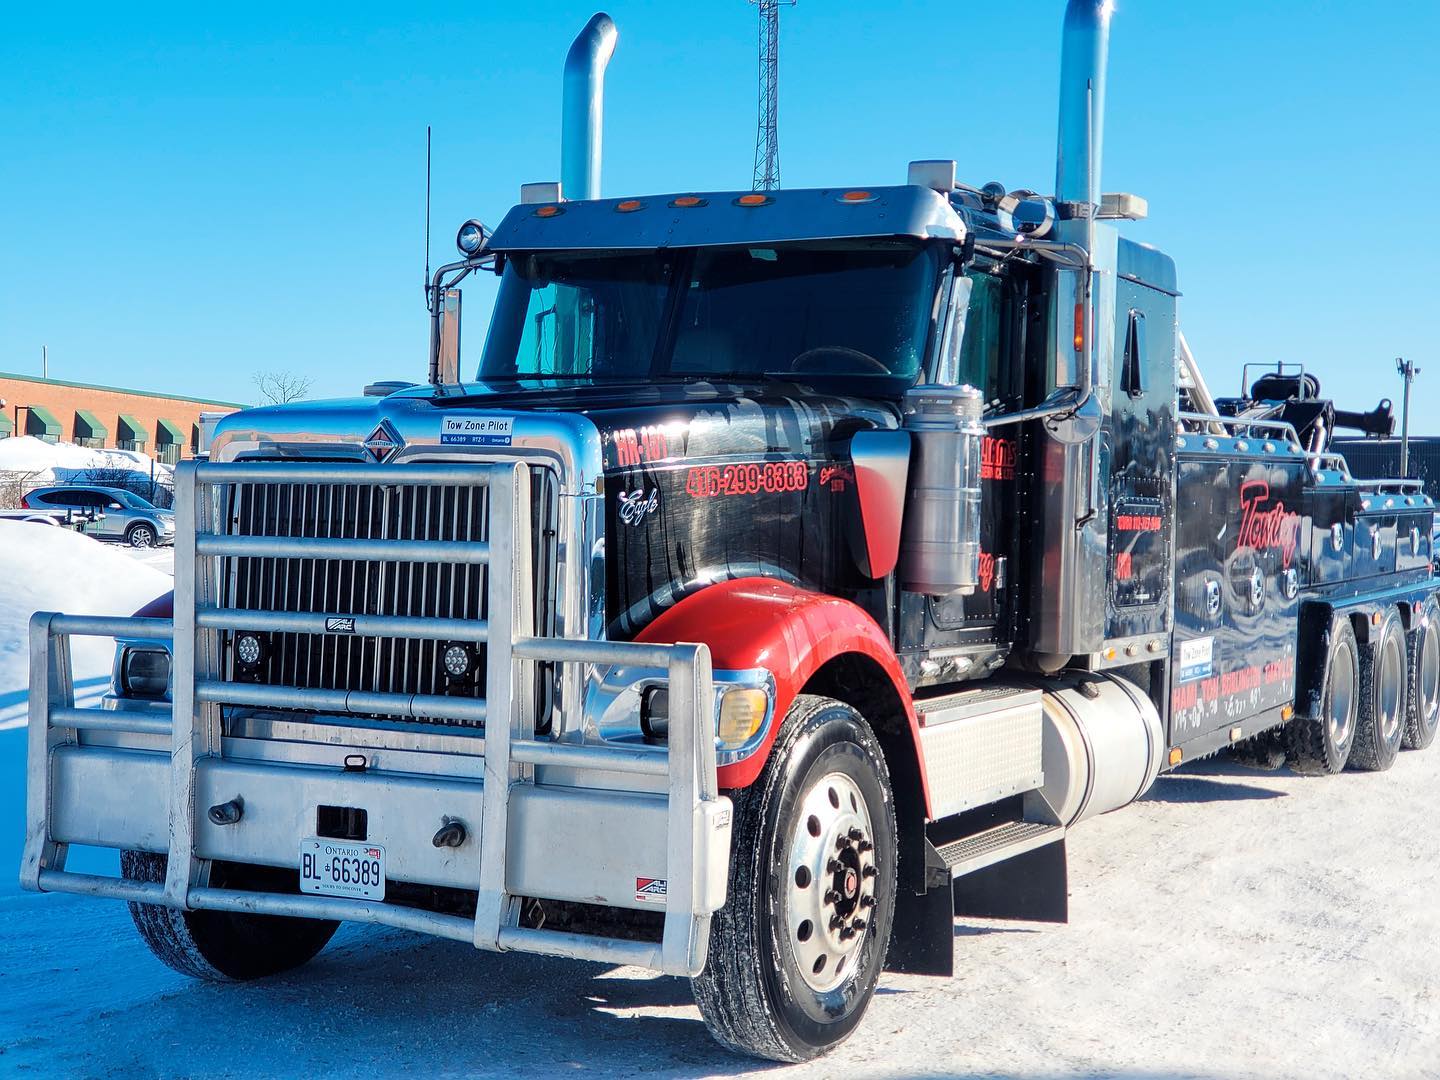 Williams Towing - Premium Flatbed Towing Services in Toronto | Williams Towing